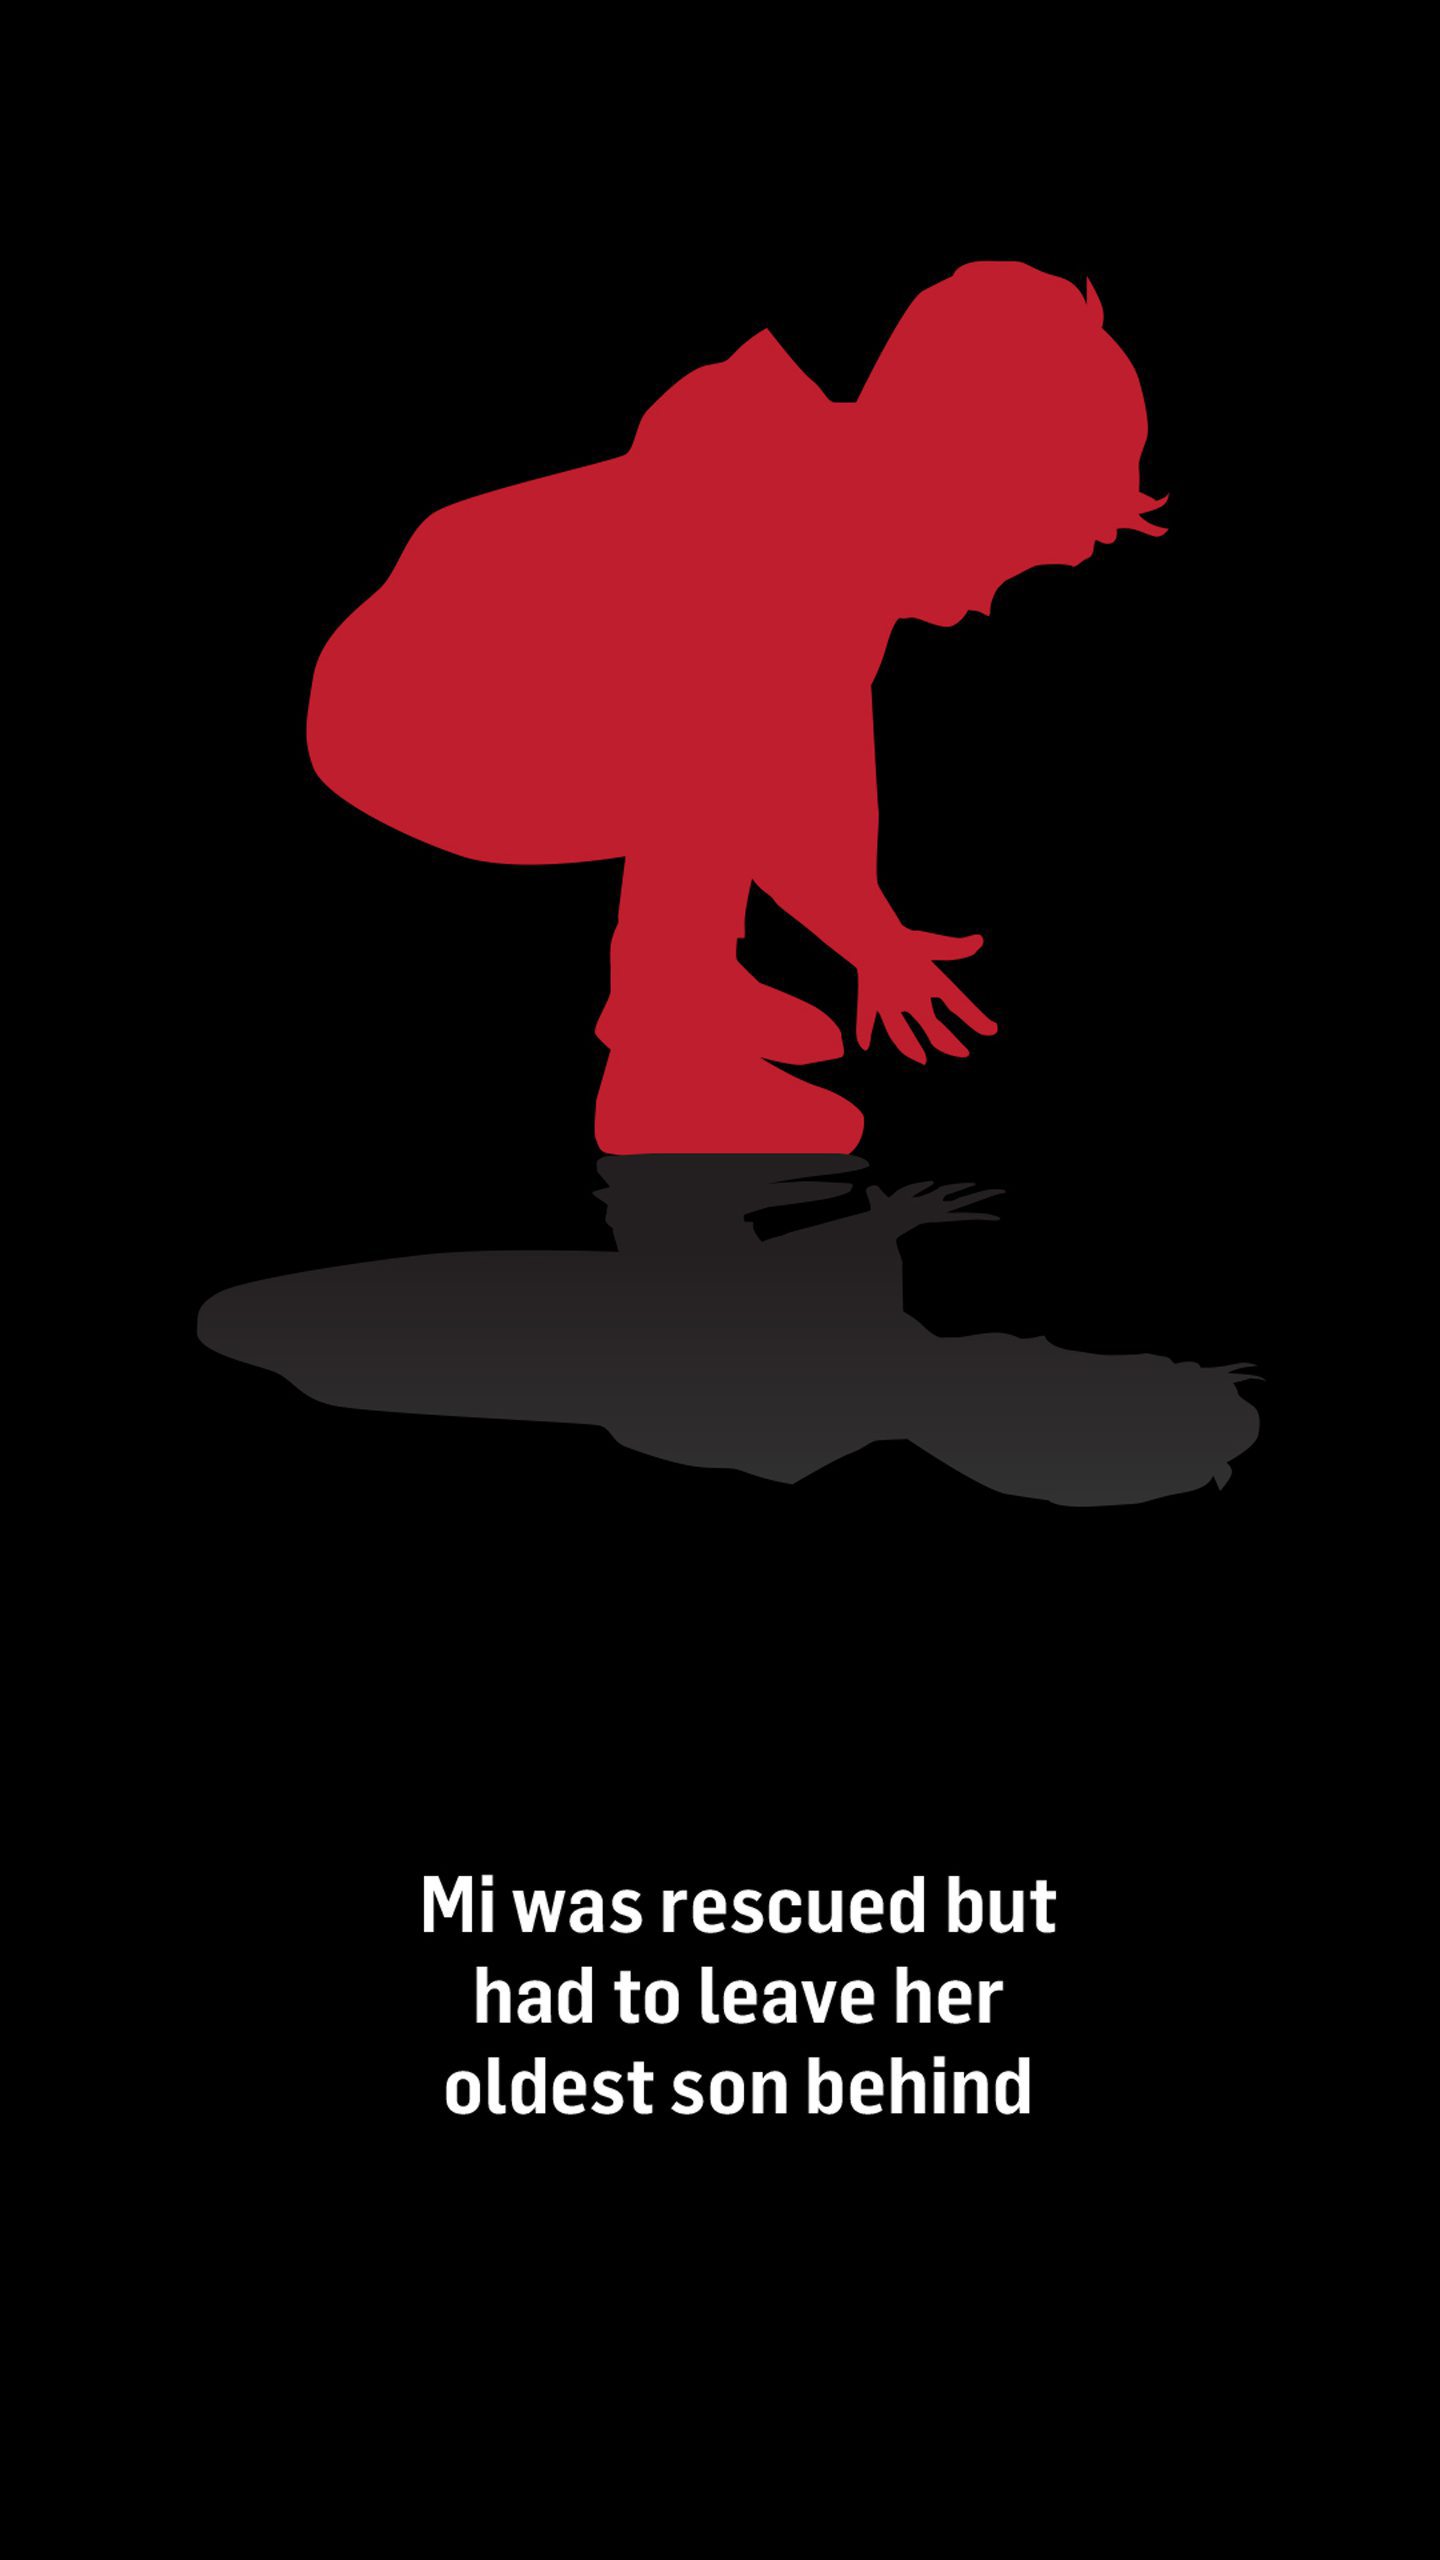 A silhouette of a young child and his shadow below him. The text reads: Mi was rescued but had to leave her oldest son behind.